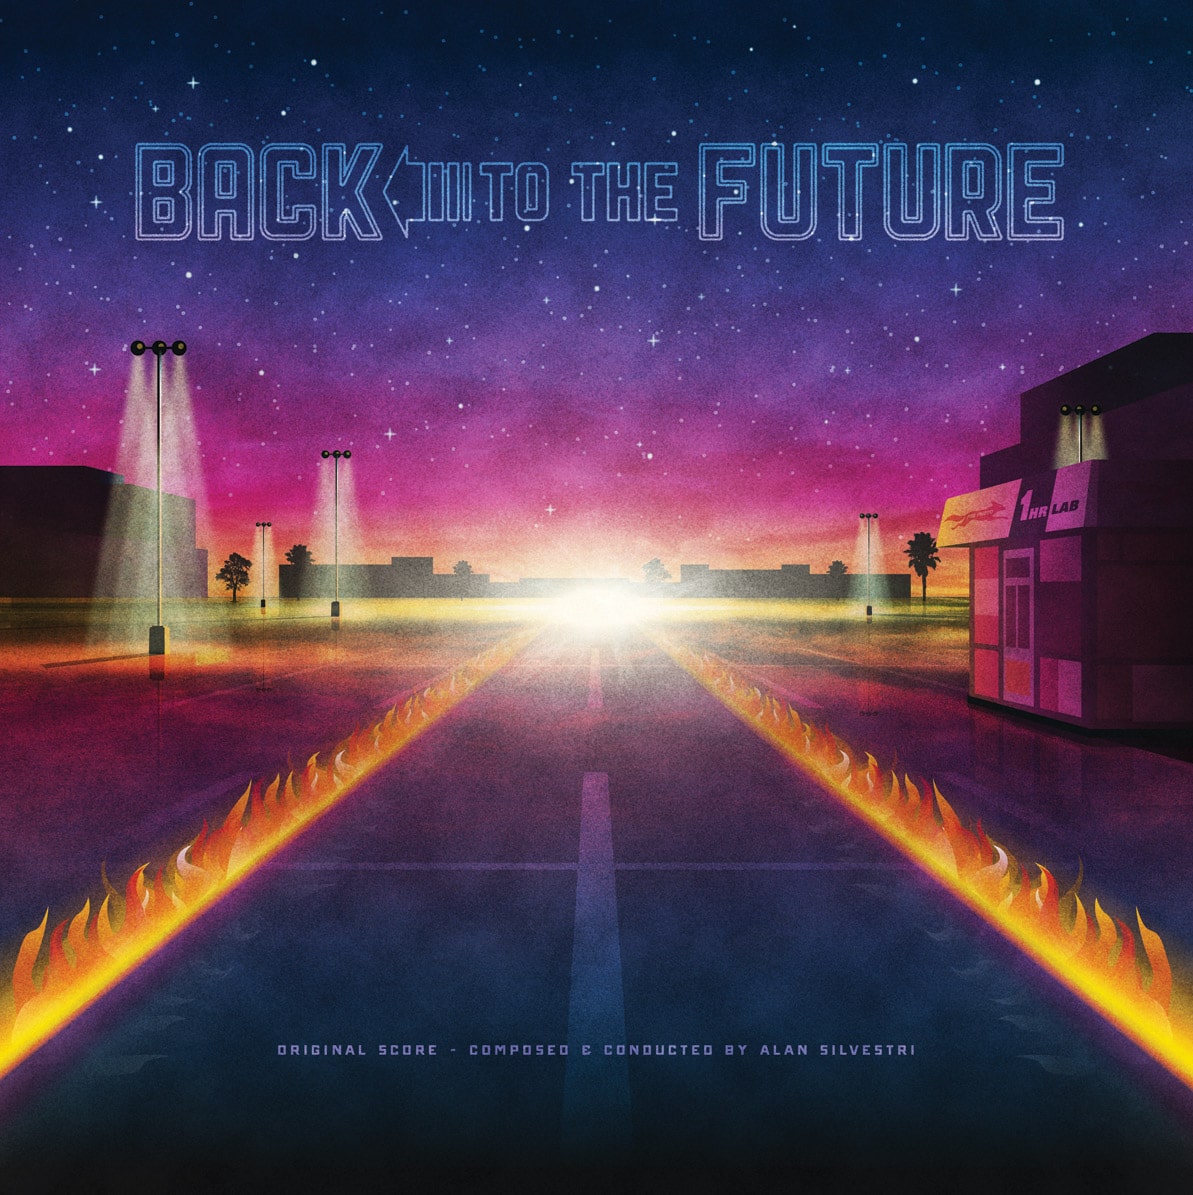 Back to the Future 1 Soundtrack Record Cover by DKNG